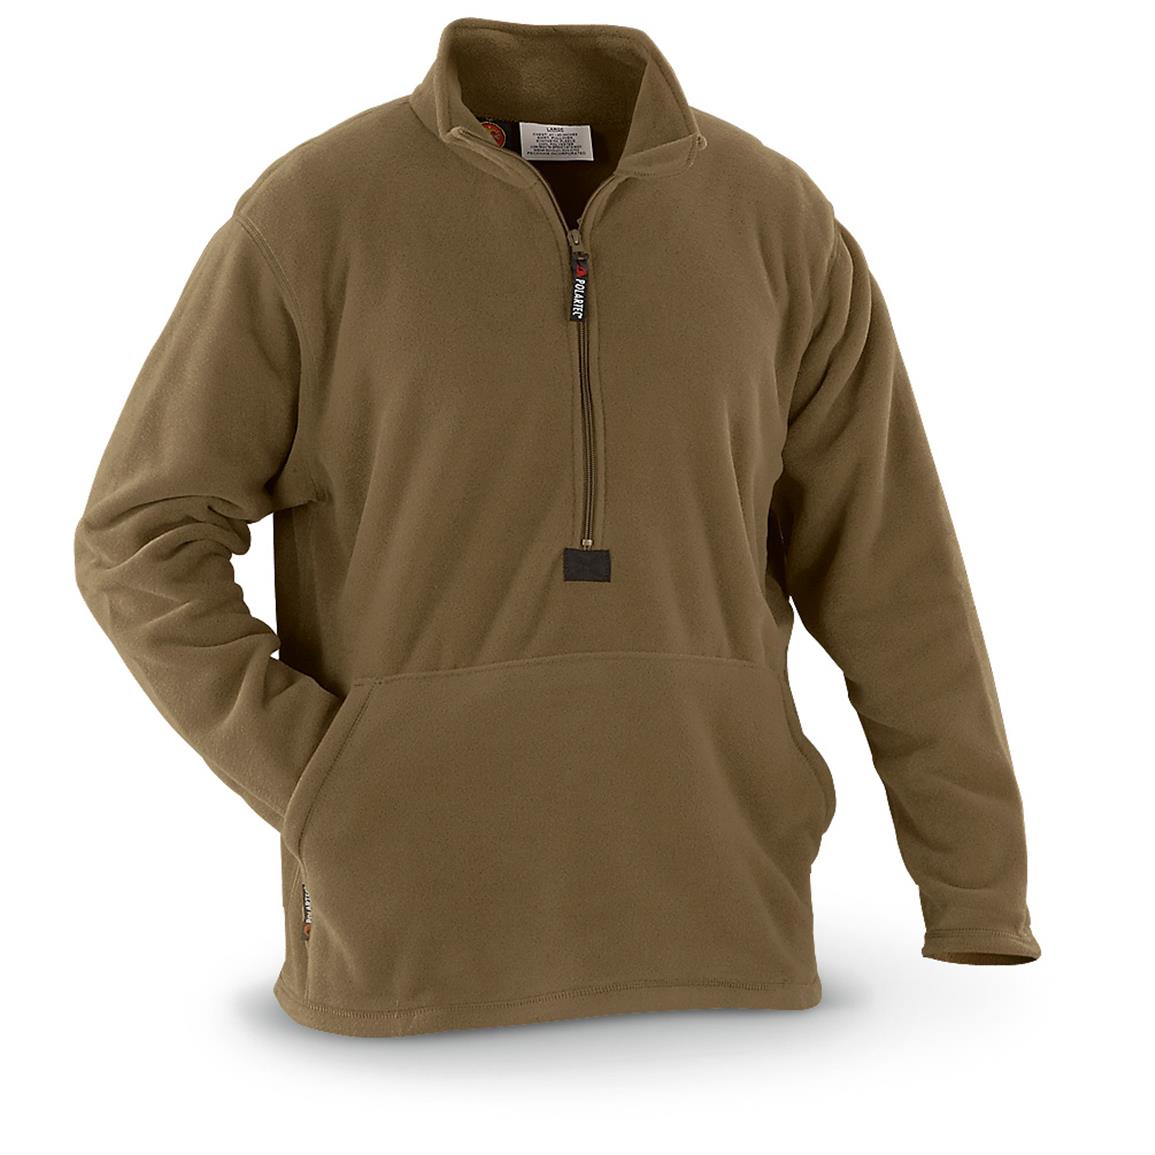 New U.S.M.C. Military Fleece Pullover, Coyote - 234180, Insulated ...